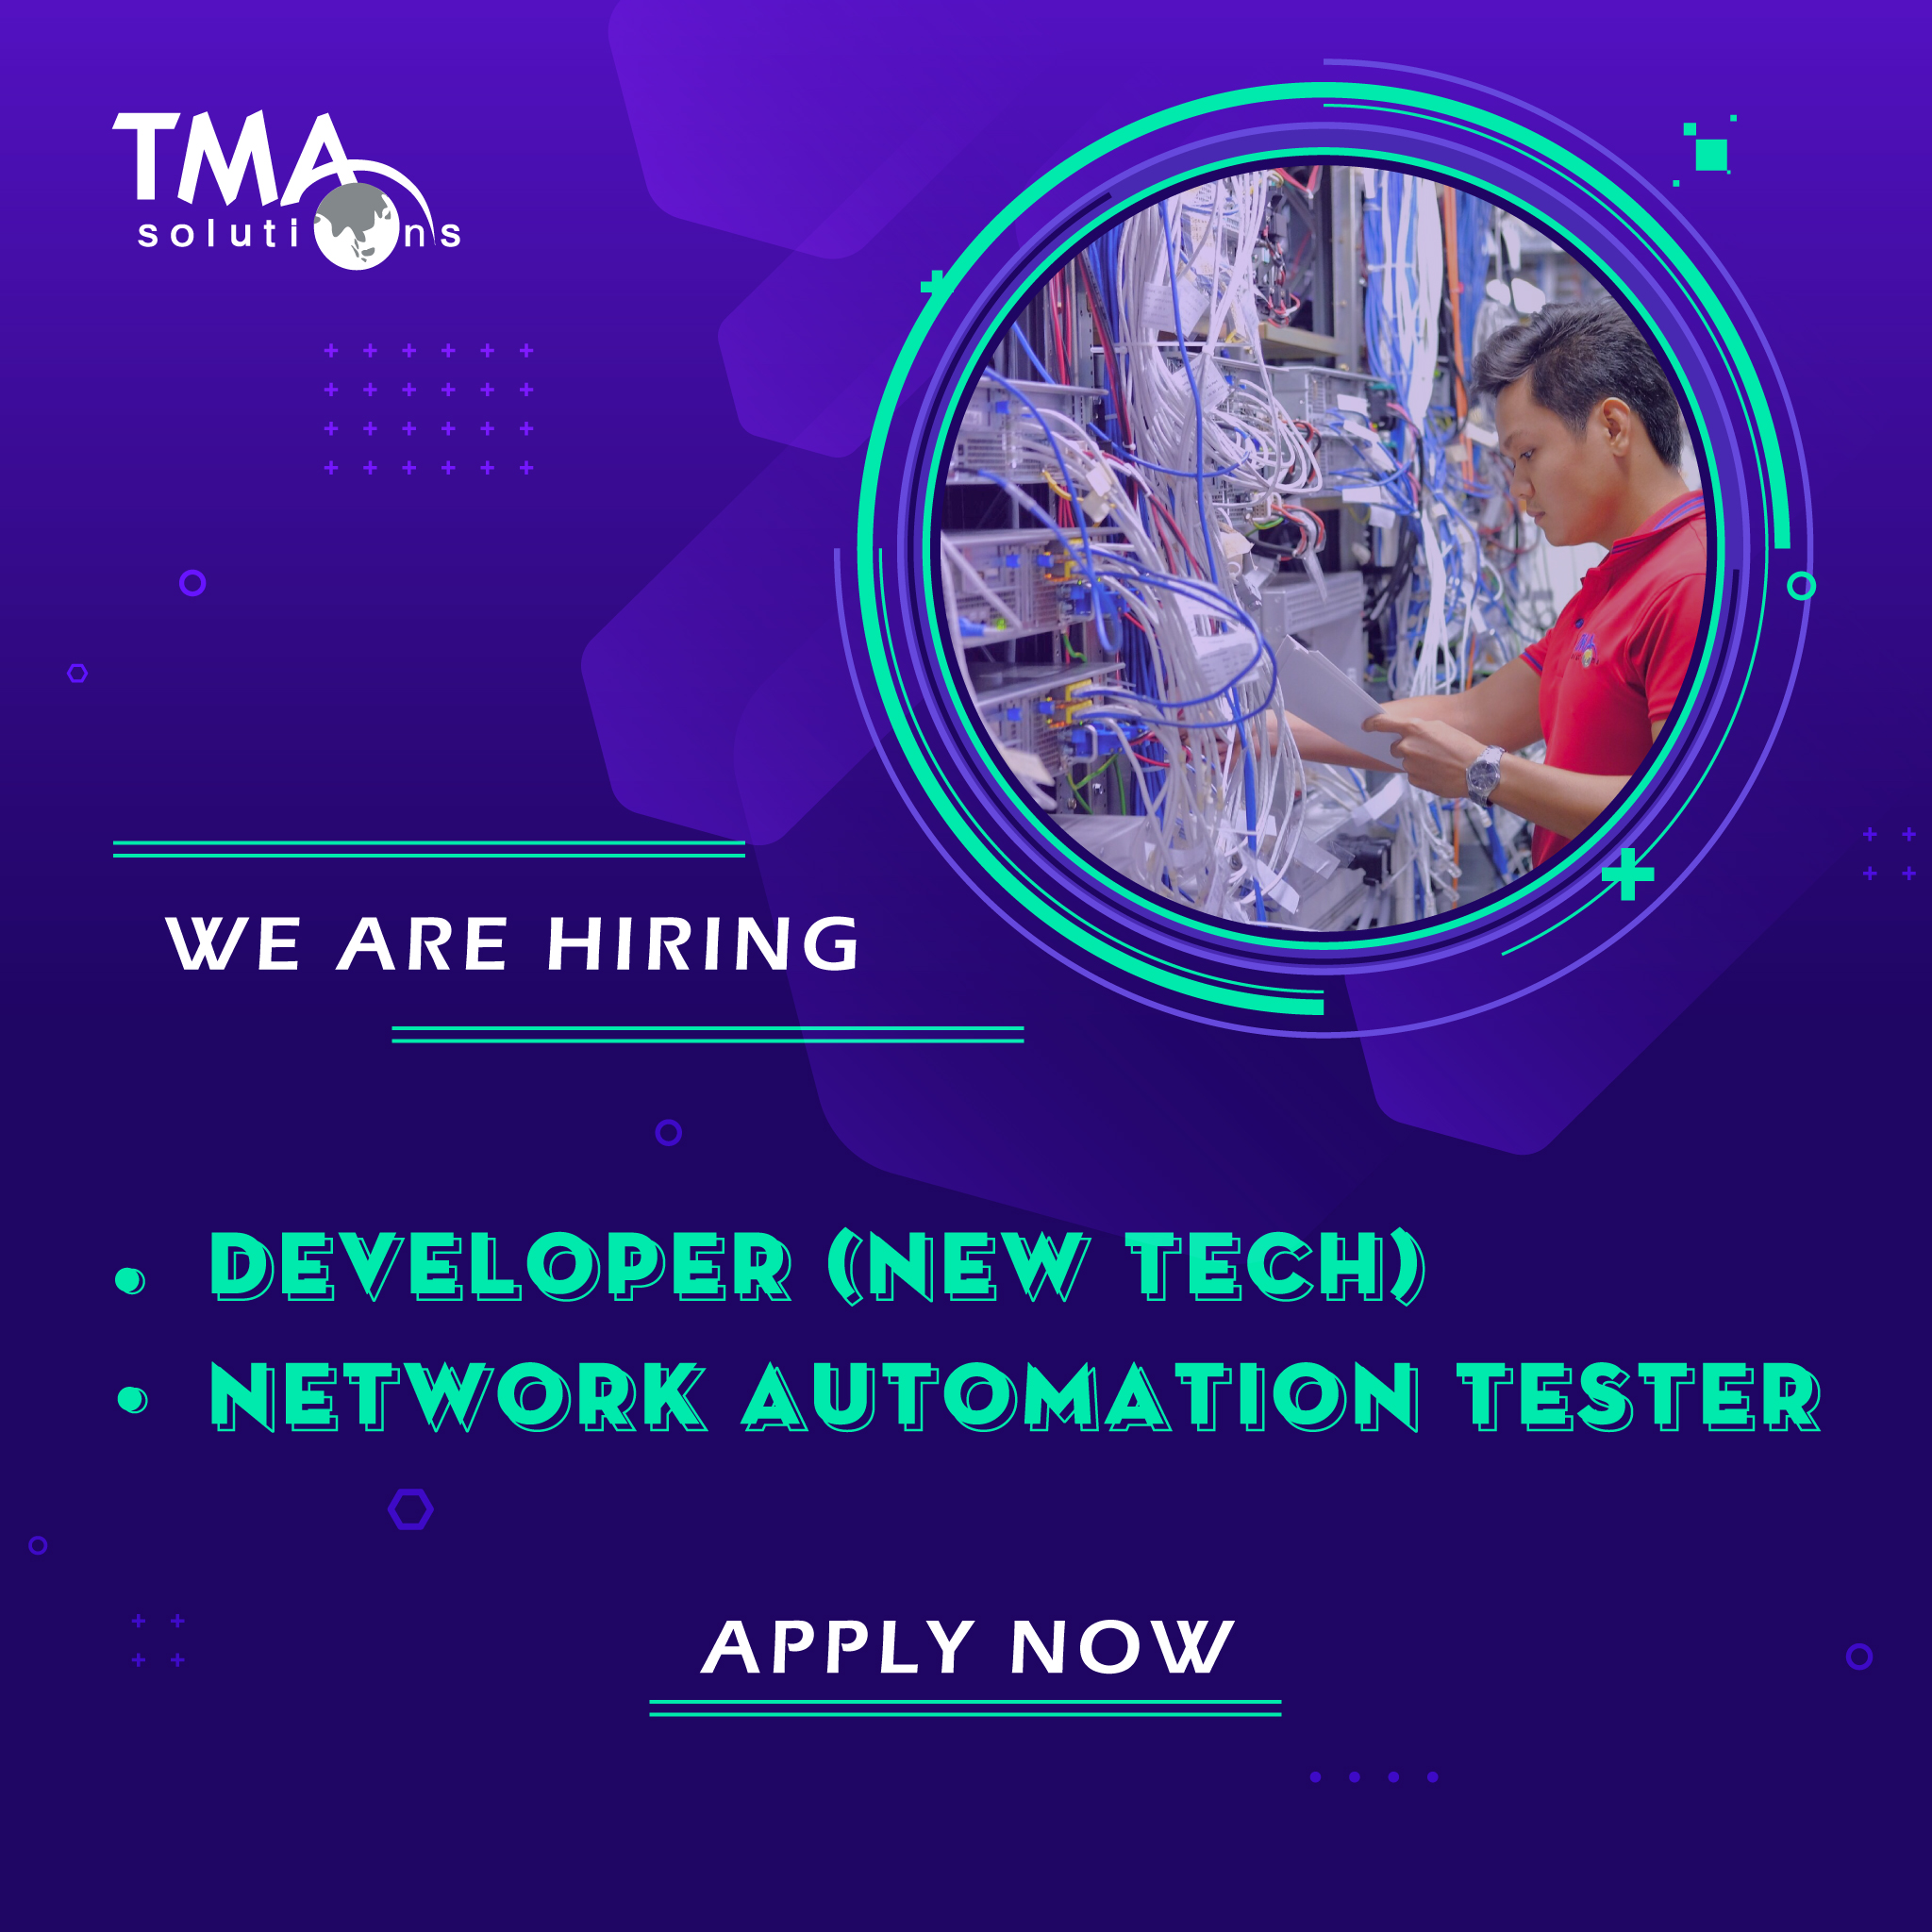 TMA is now hiring Developer (New Tech) and Network Automation Tester